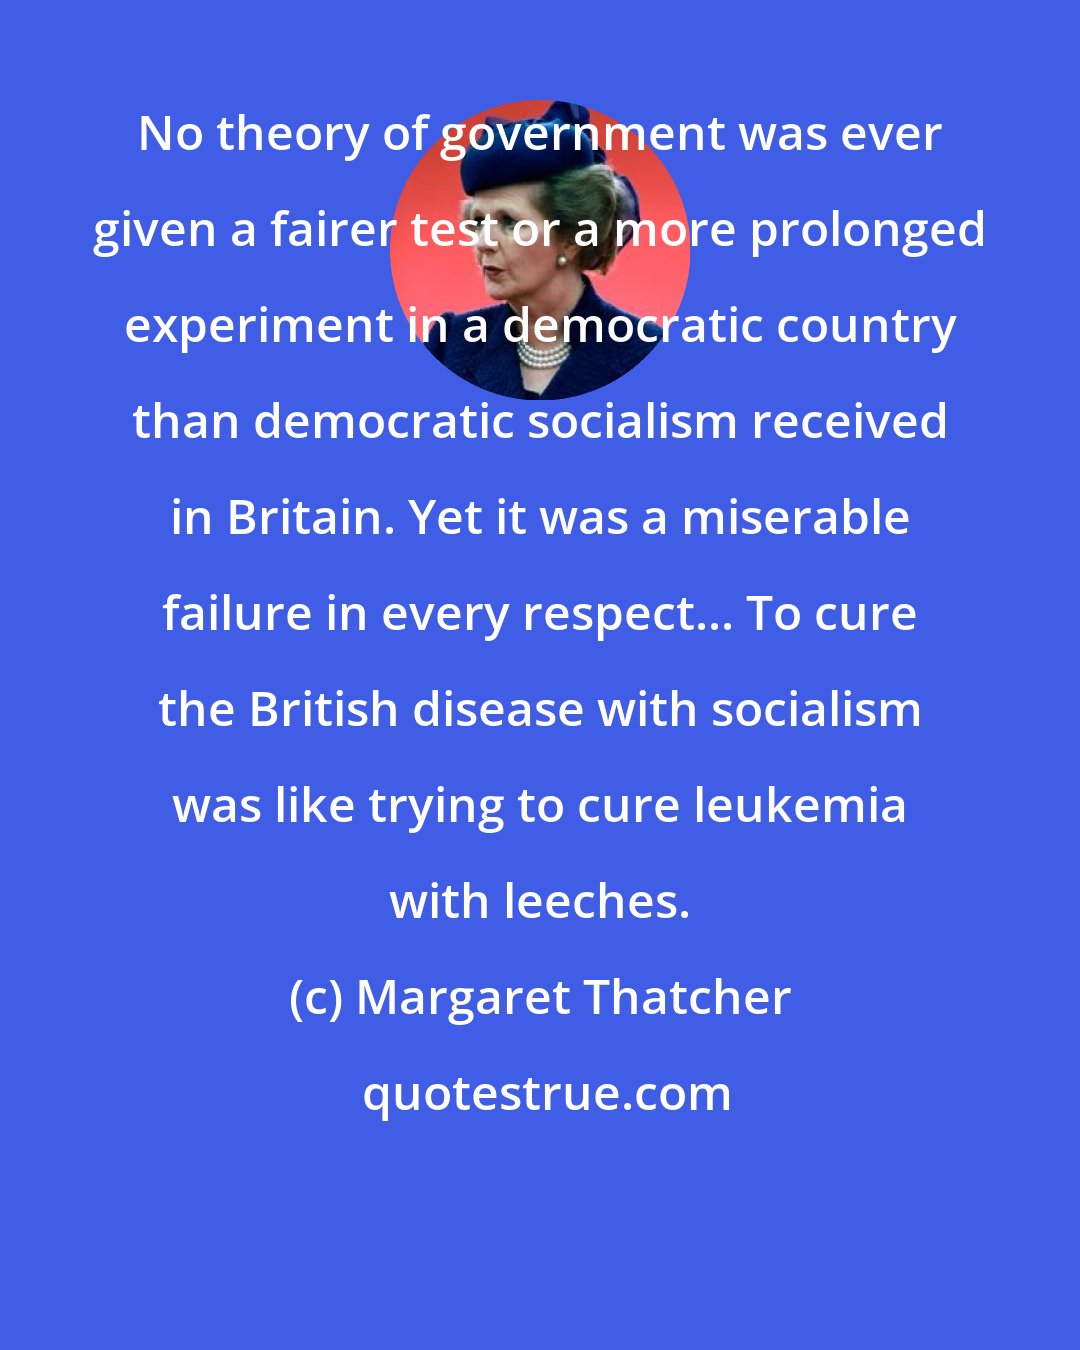 Margaret Thatcher: No theory of government was ever given a fairer test or a more prolonged experiment in a democratic country than democratic socialism received in Britain. Yet it was a miserable failure in every respect... To cure the British disease with socialism was like trying to cure leukemia with leeches.